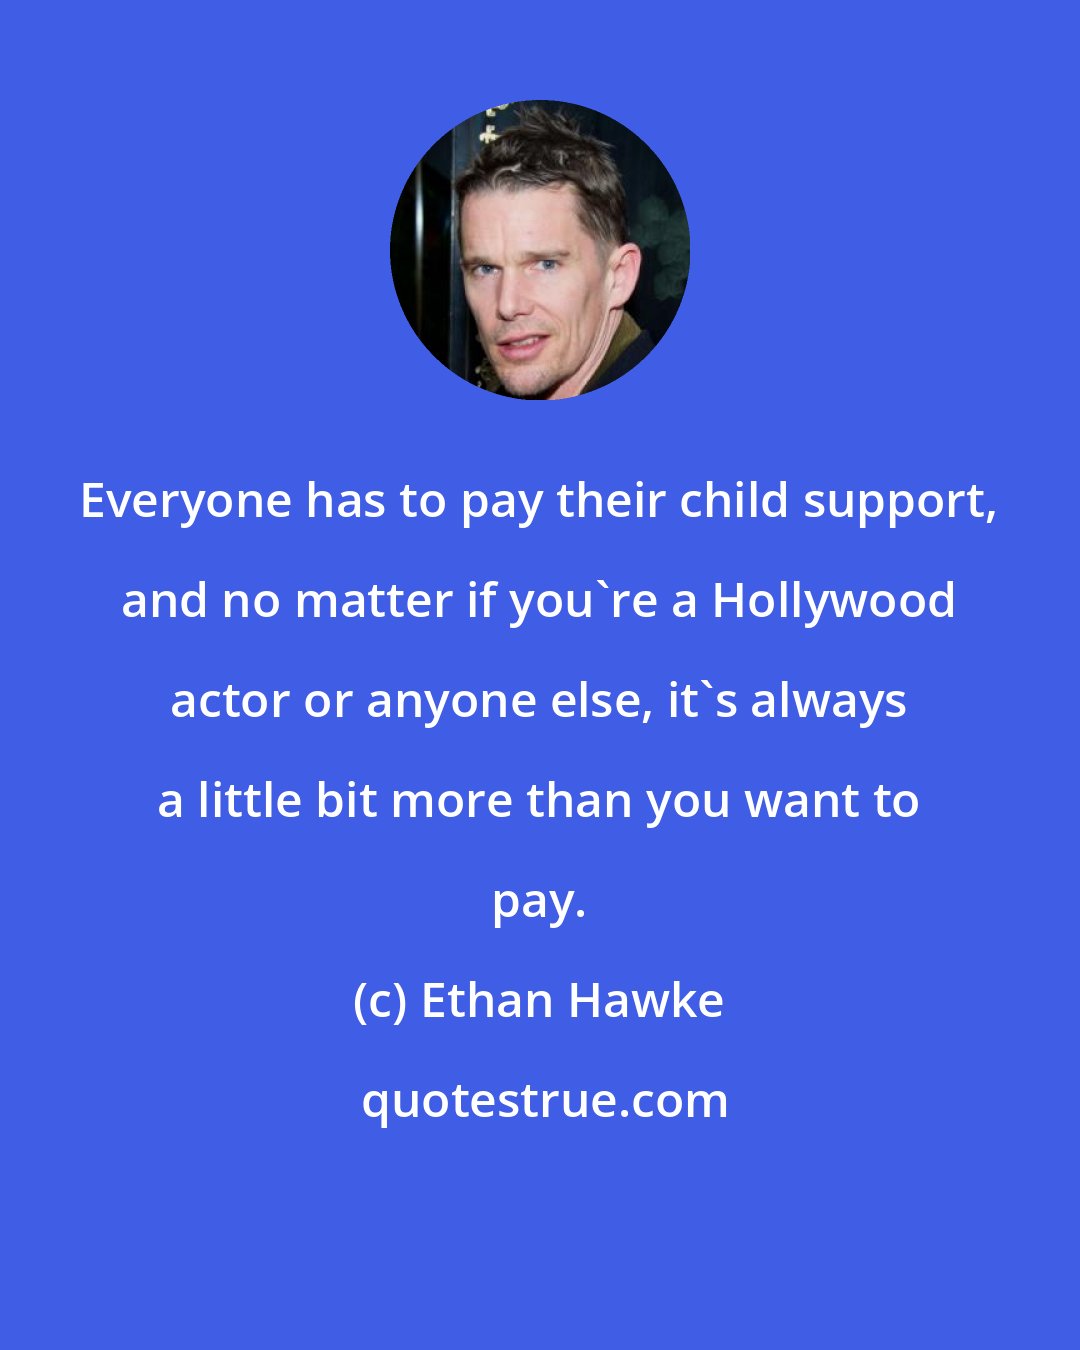 Ethan Hawke: Everyone has to pay their child support, and no matter if you're a Hollywood actor or anyone else, it's always a little bit more than you want to pay.